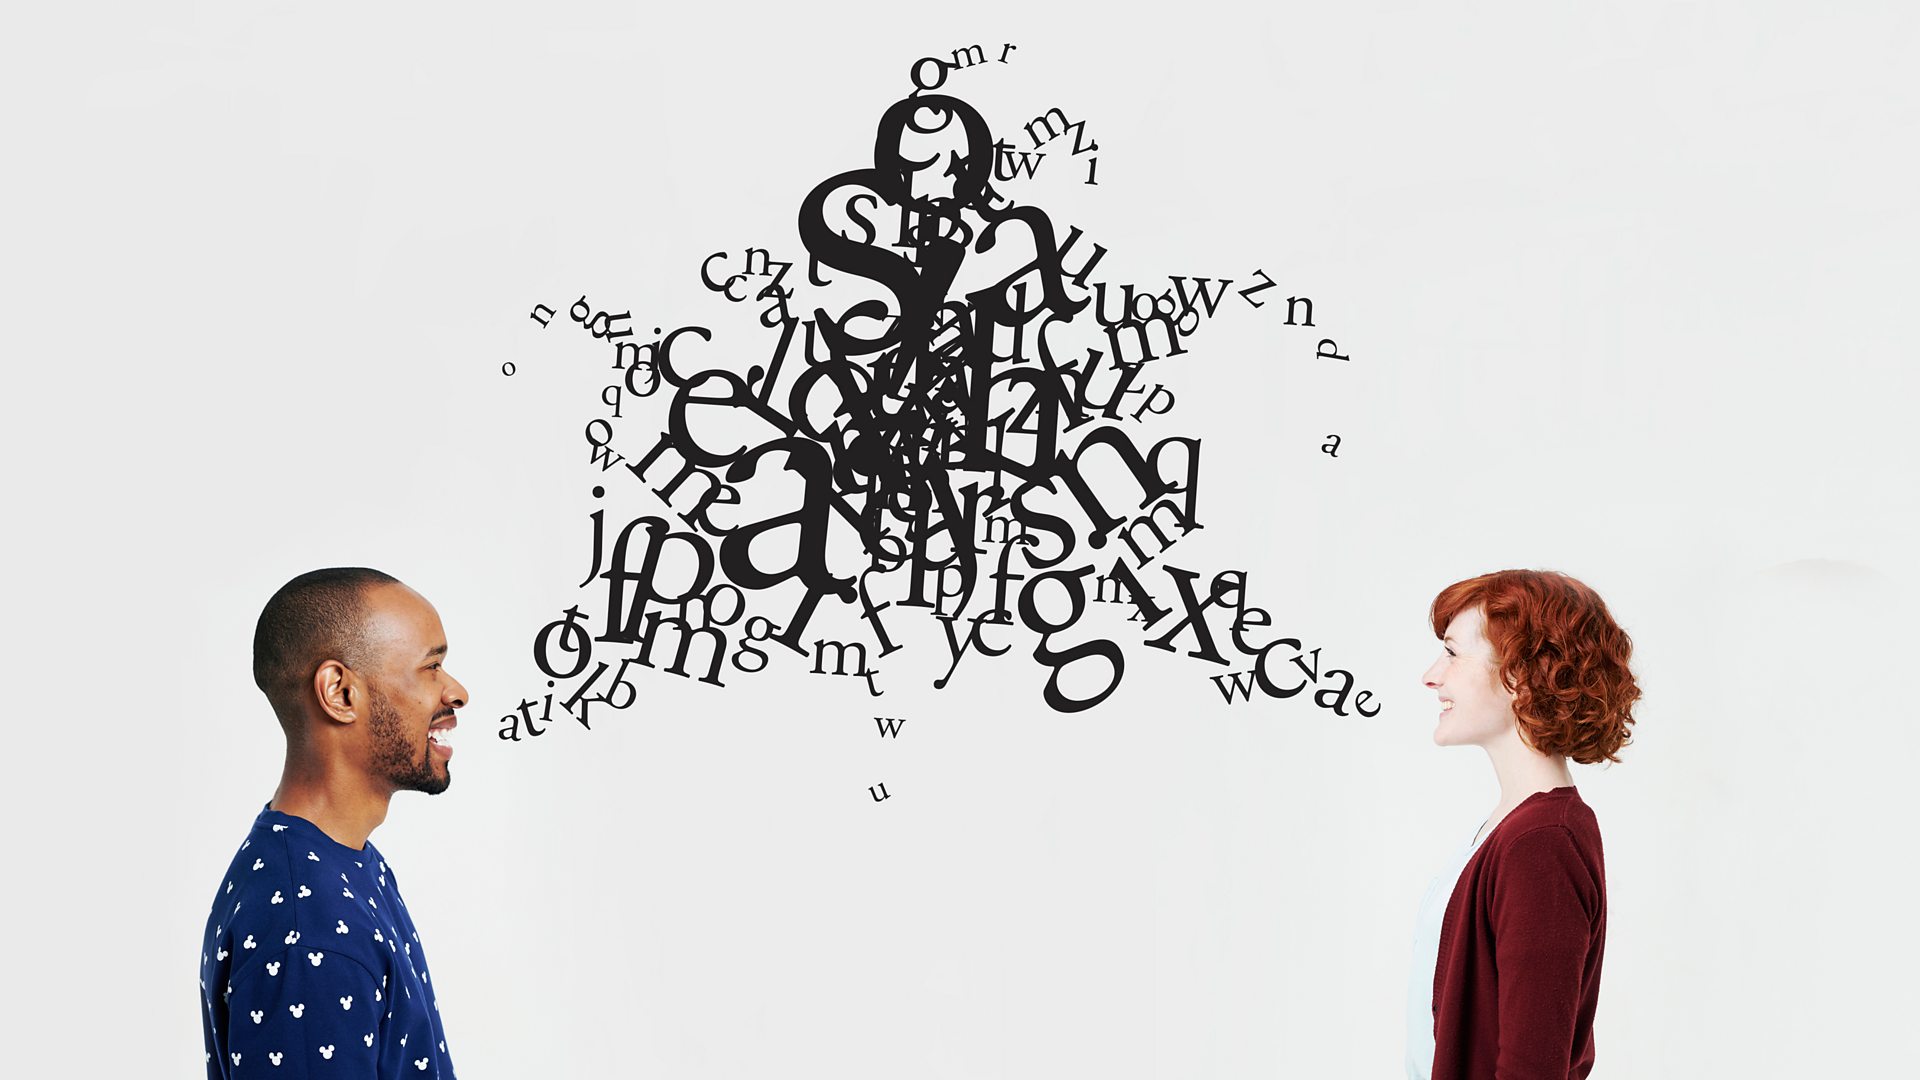 Polyglot vs. Linguist: The Best Strategies to Learn a New Language